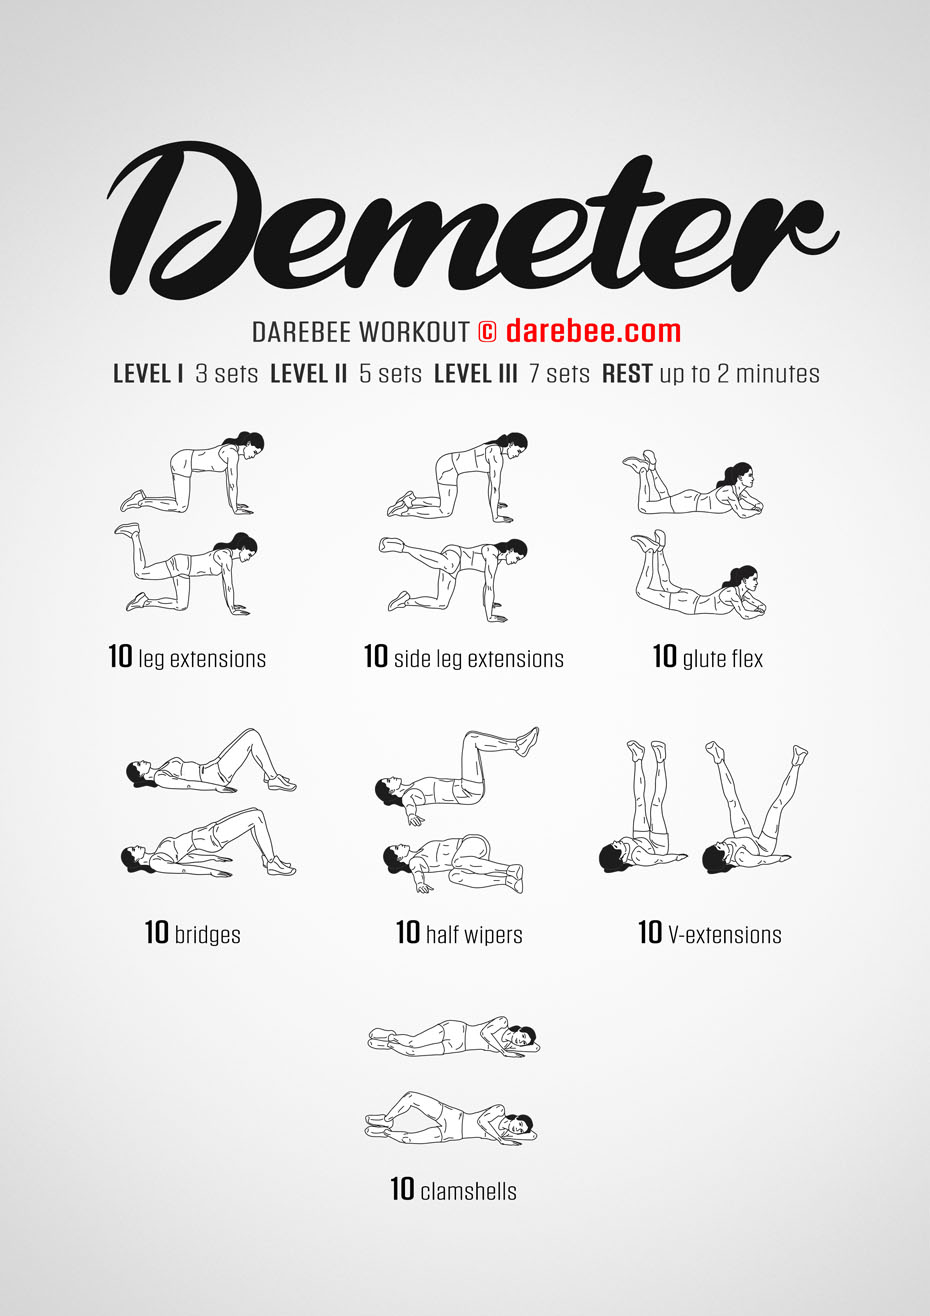 Demeter is a Darebee no-equipment lower body workout that helps you develop strength in muscles and tendons, ligaments and support muscle groups.